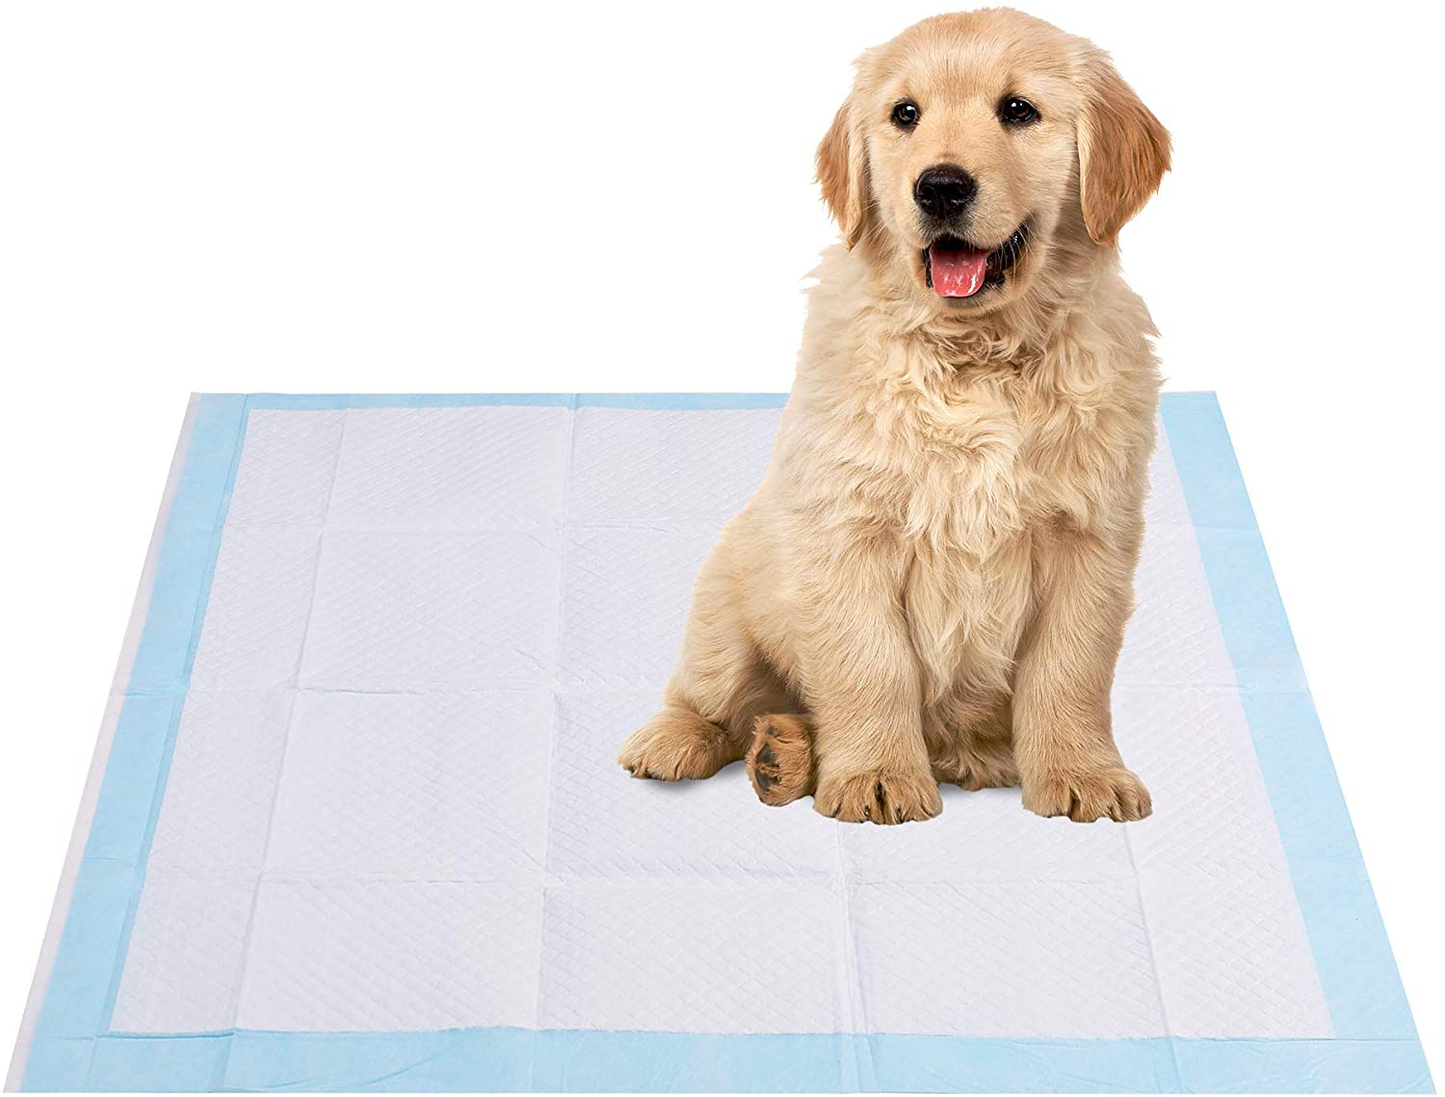 Disposable 50 Counts，Extra Large Dog Pee Pads 18"X23", Super Absorbent ，Leak-Proof 6 Layer and Tear Resistan， Puppy Potty Training Pet Pads,Quick Drying No Leaking Pee Pads for Dogs Cats Rabbits Pets